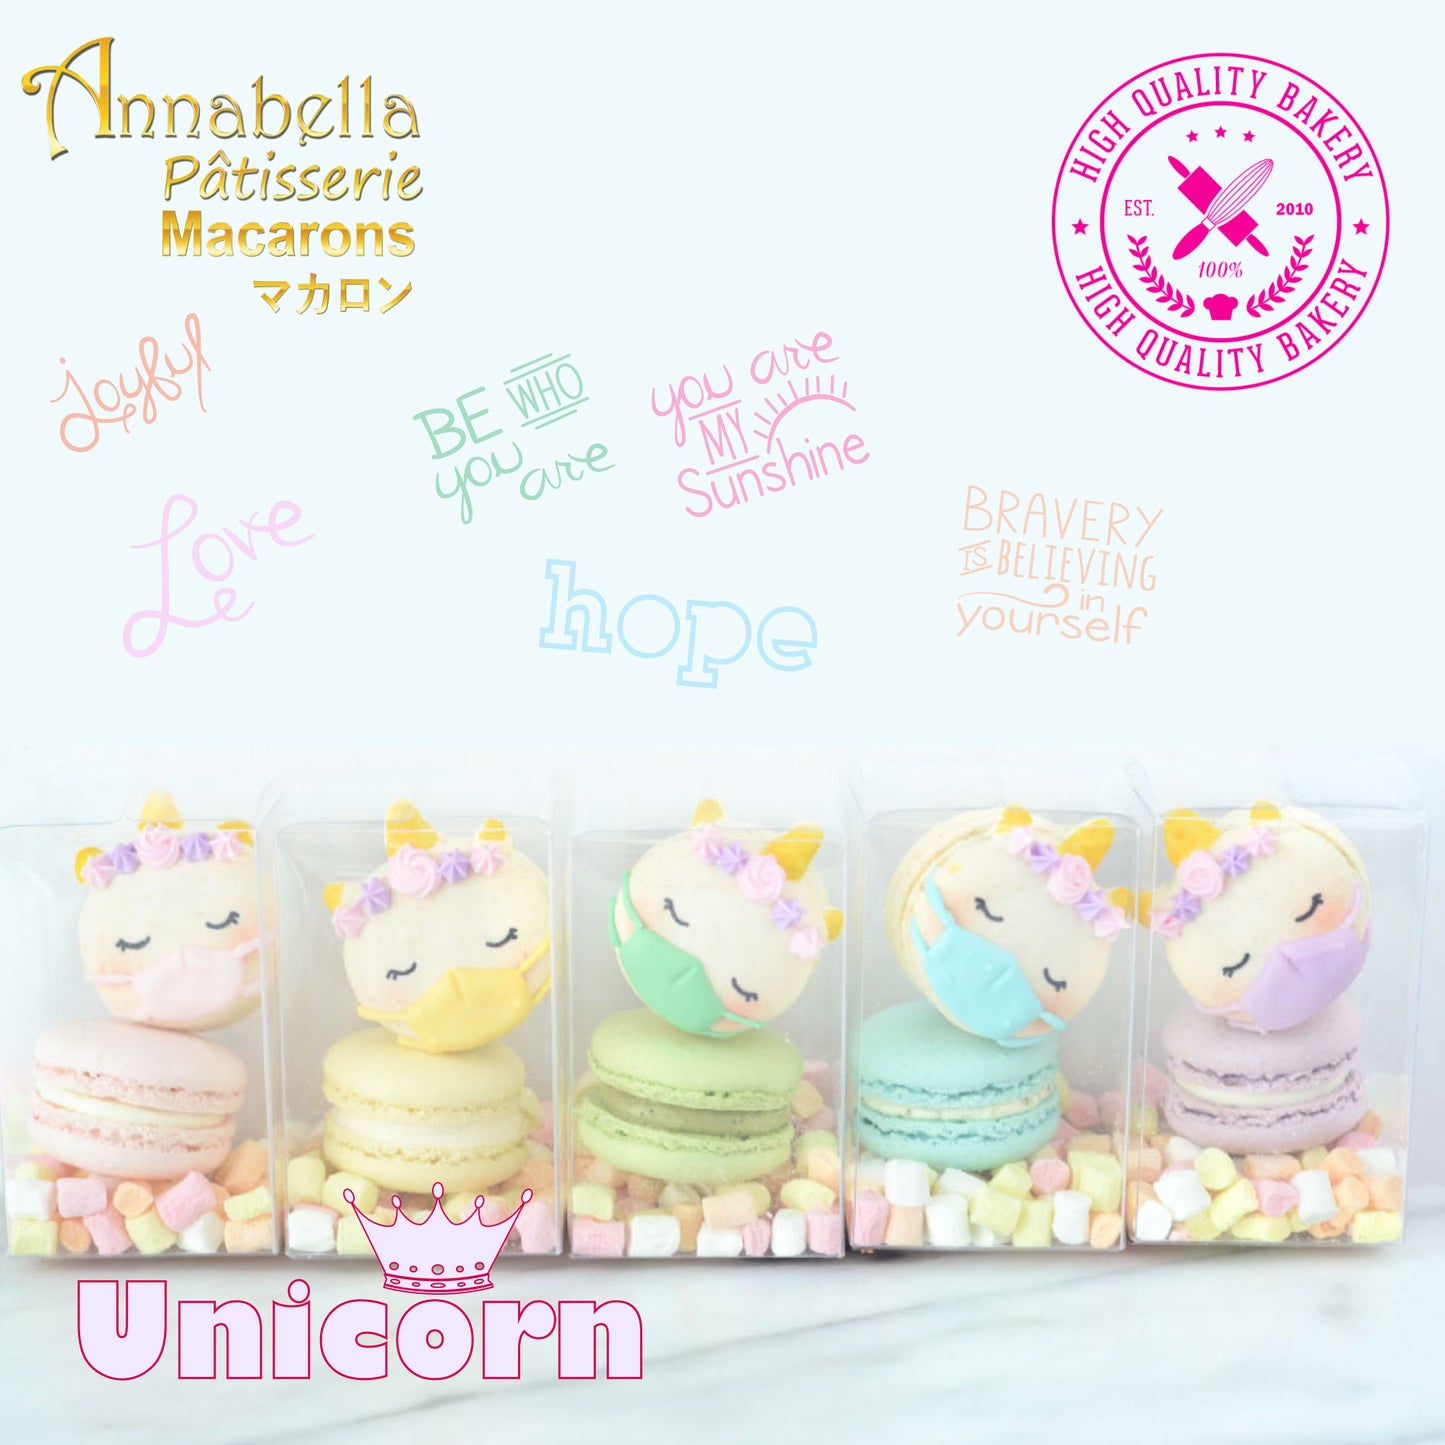 Unicorn Macaron Tower |  43pcs Macarons Total in a Tower | $138 Only